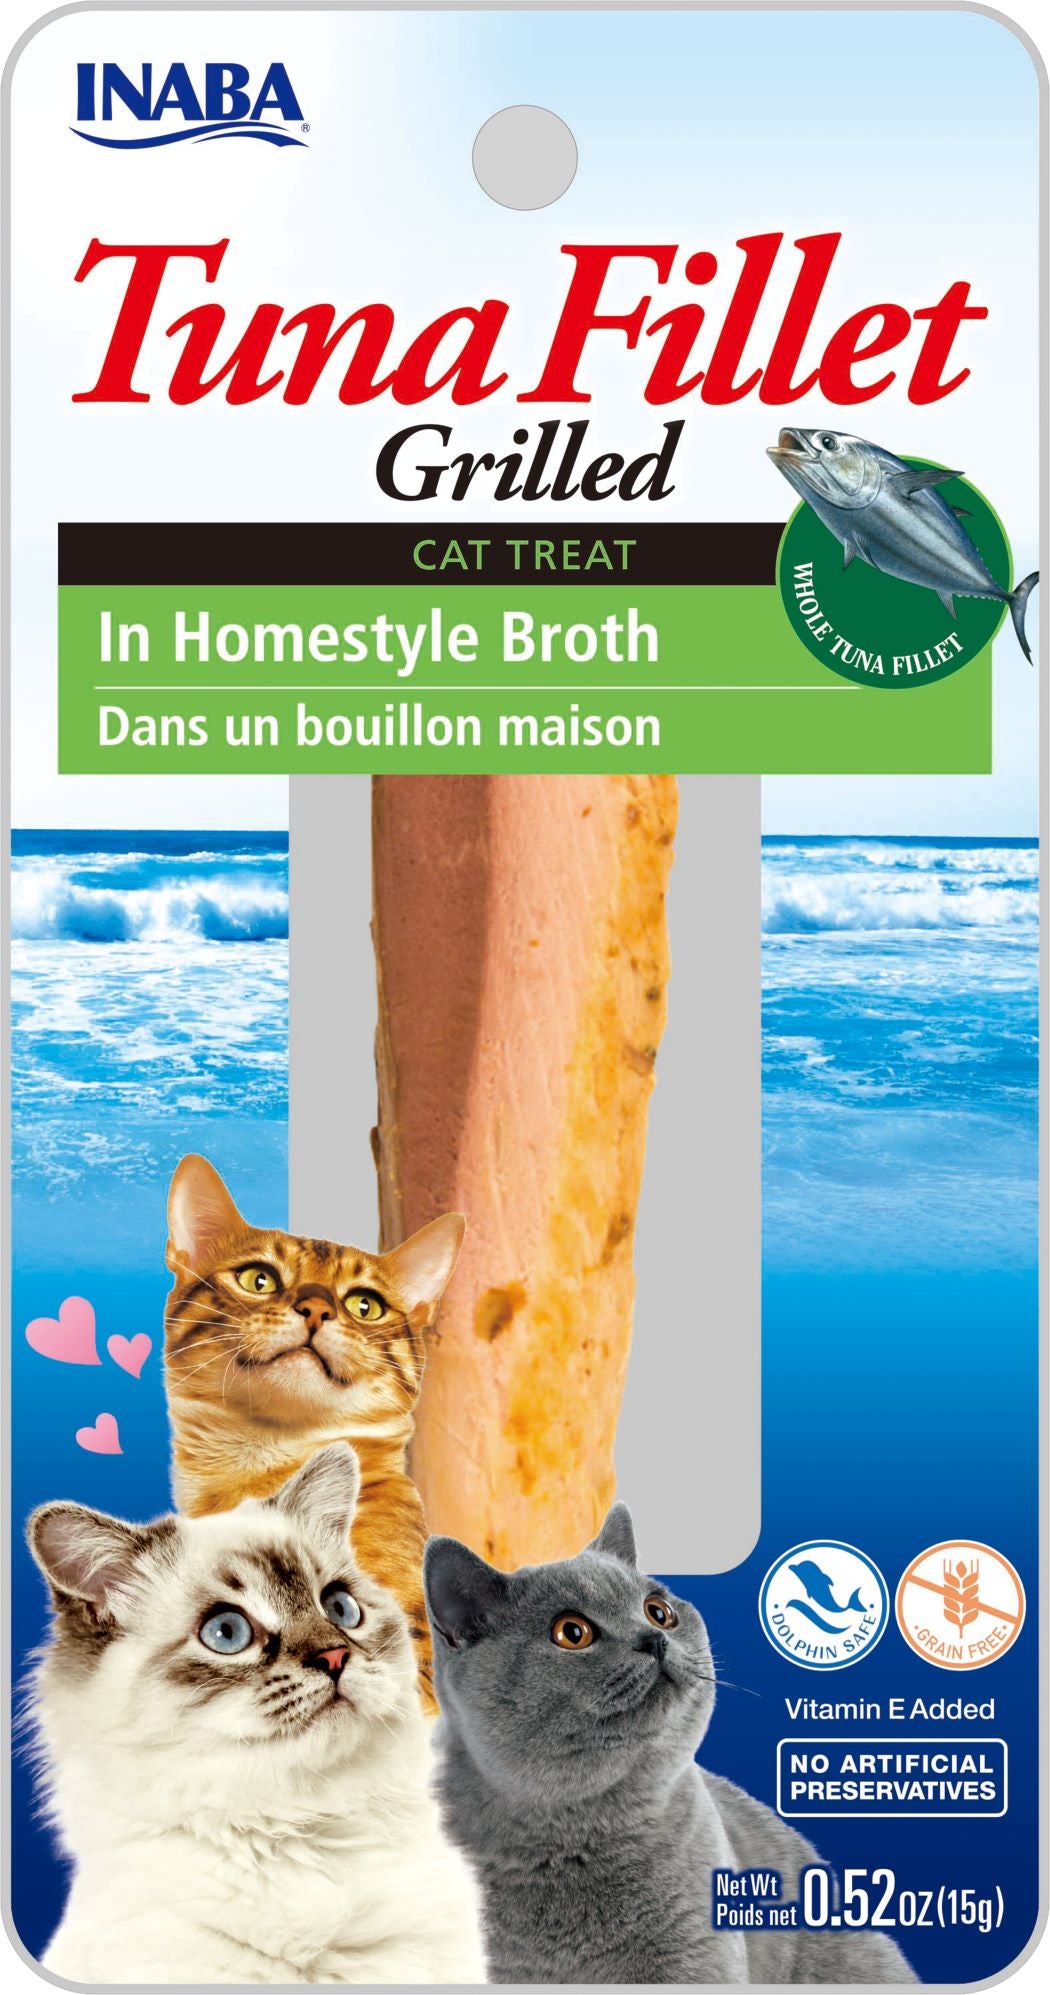 Inaba Ciao Grain-Free Cat Treat, Grilled Tuna Fillet in Homestyle Broth, 1 Fillet